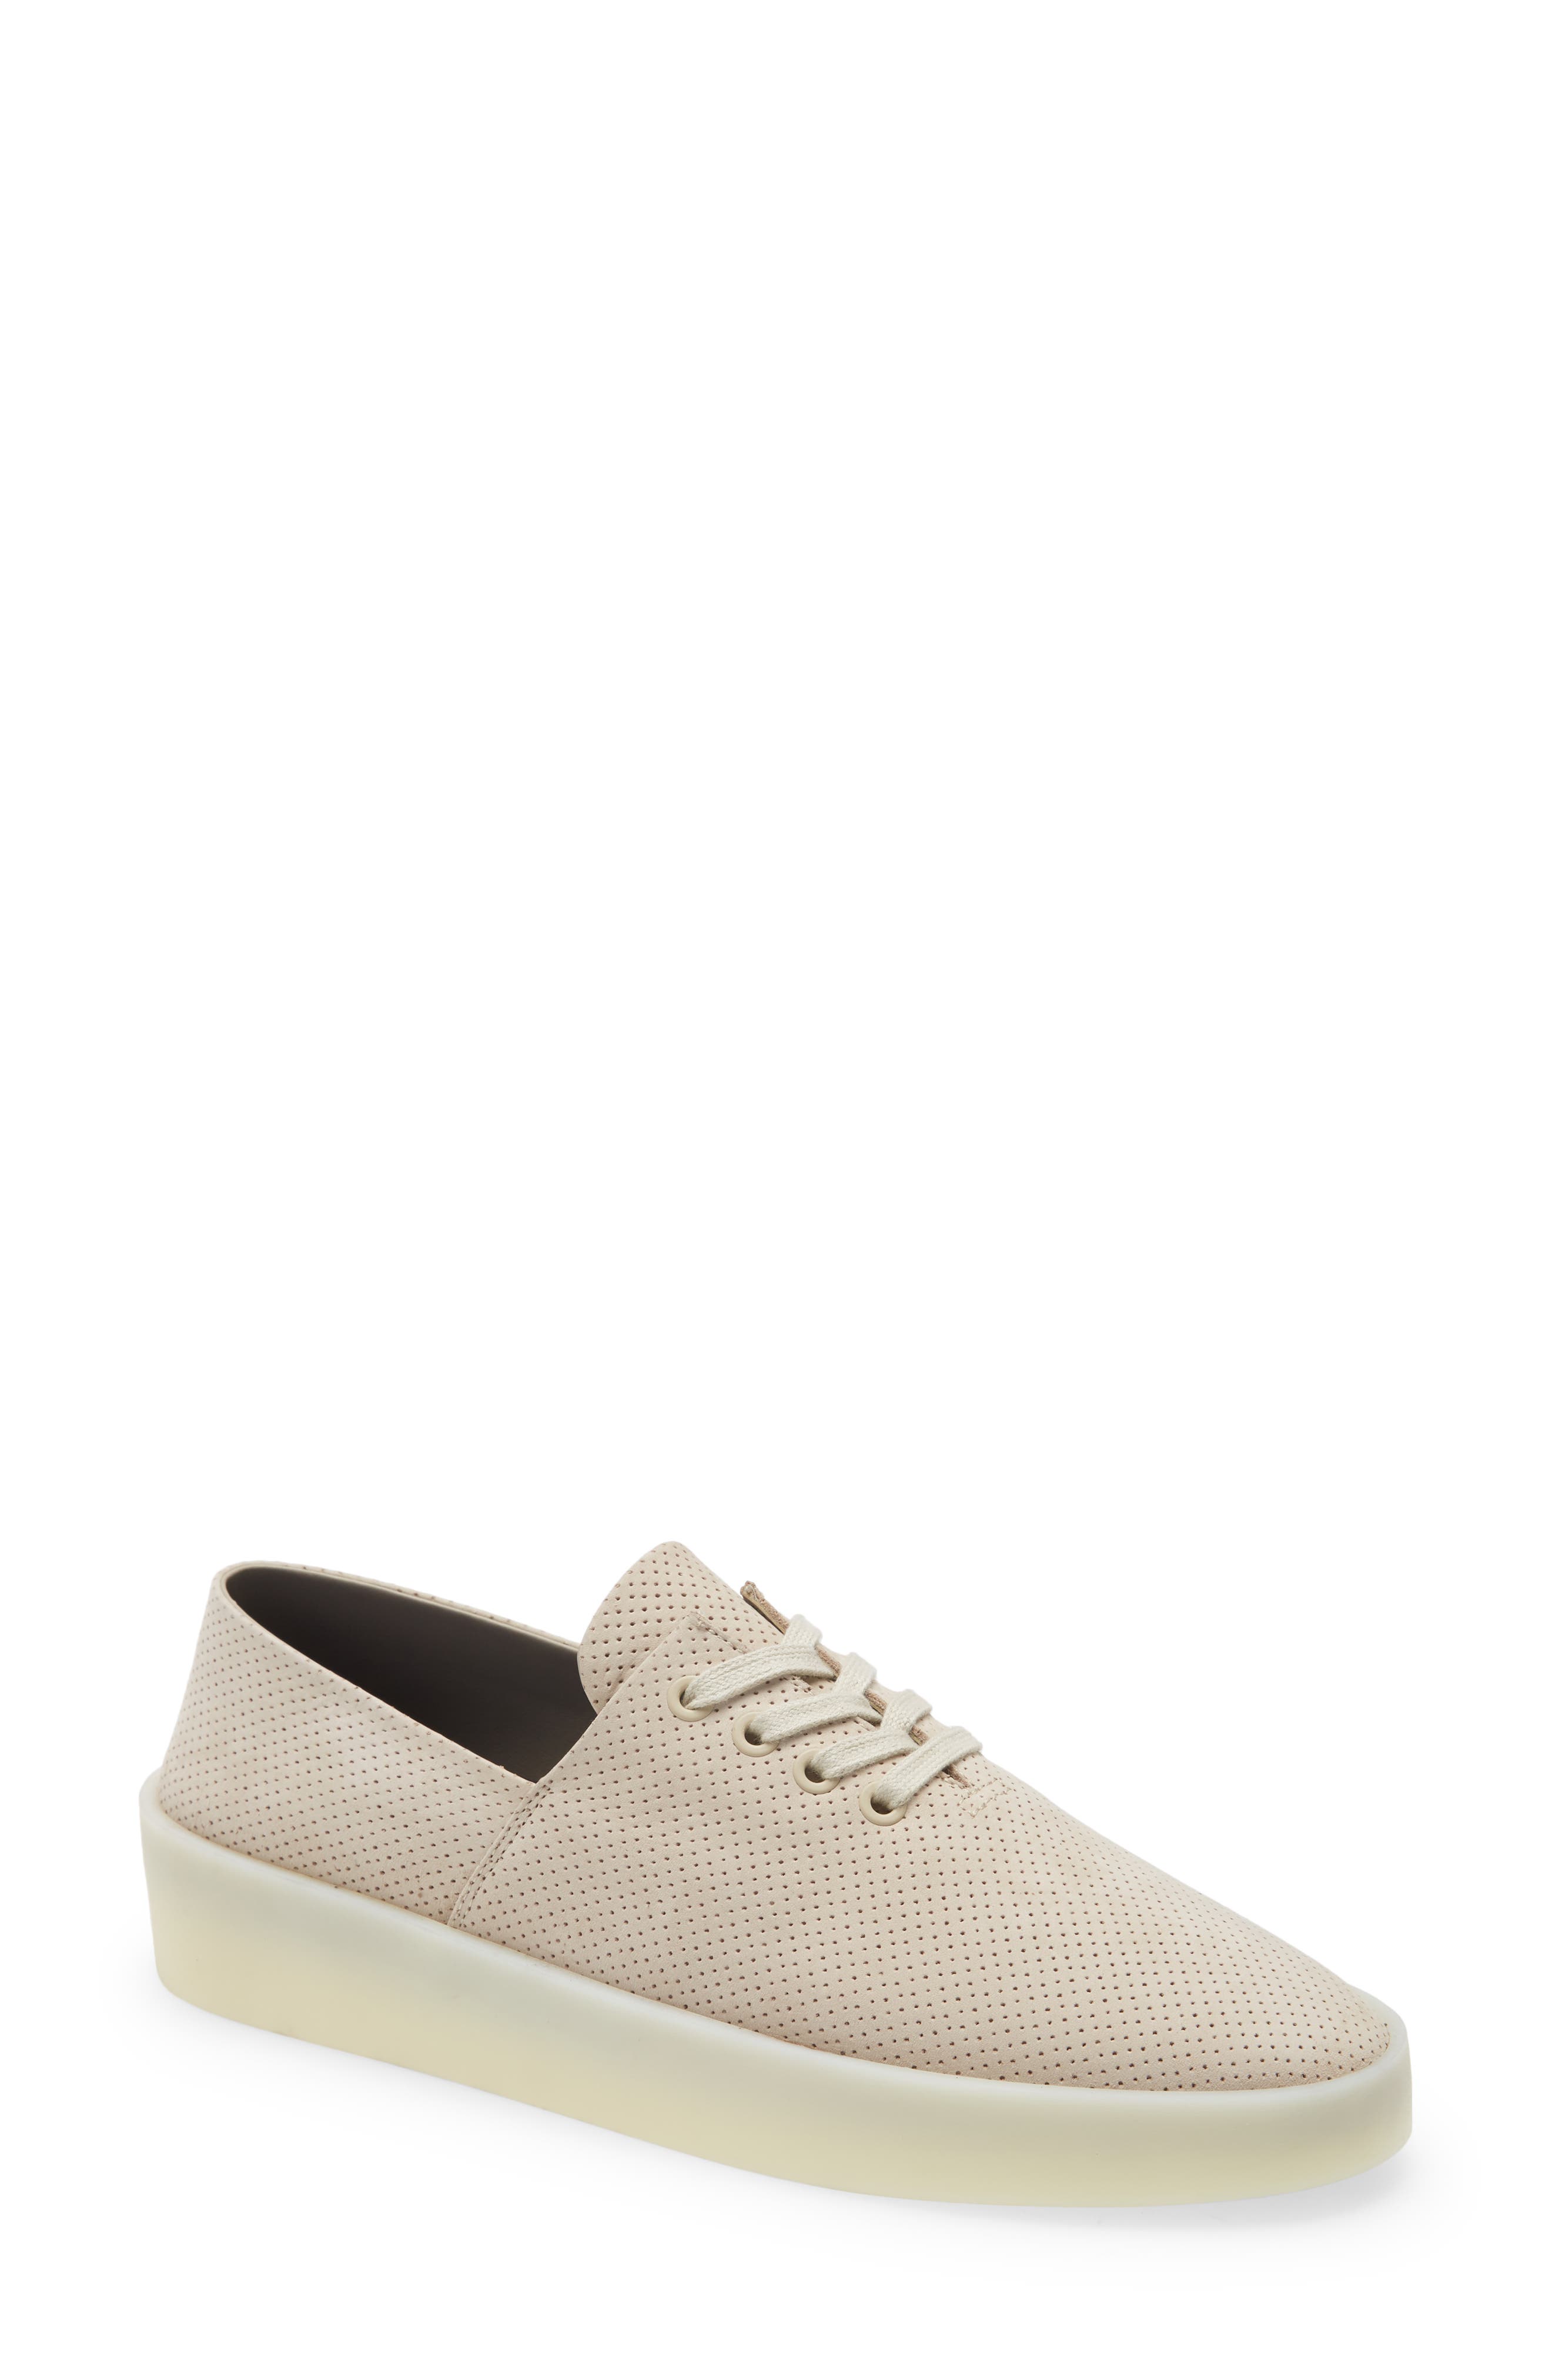 Fear of God 110 Low Top Sneaker in Cream at Nordstrom, Size 9Us